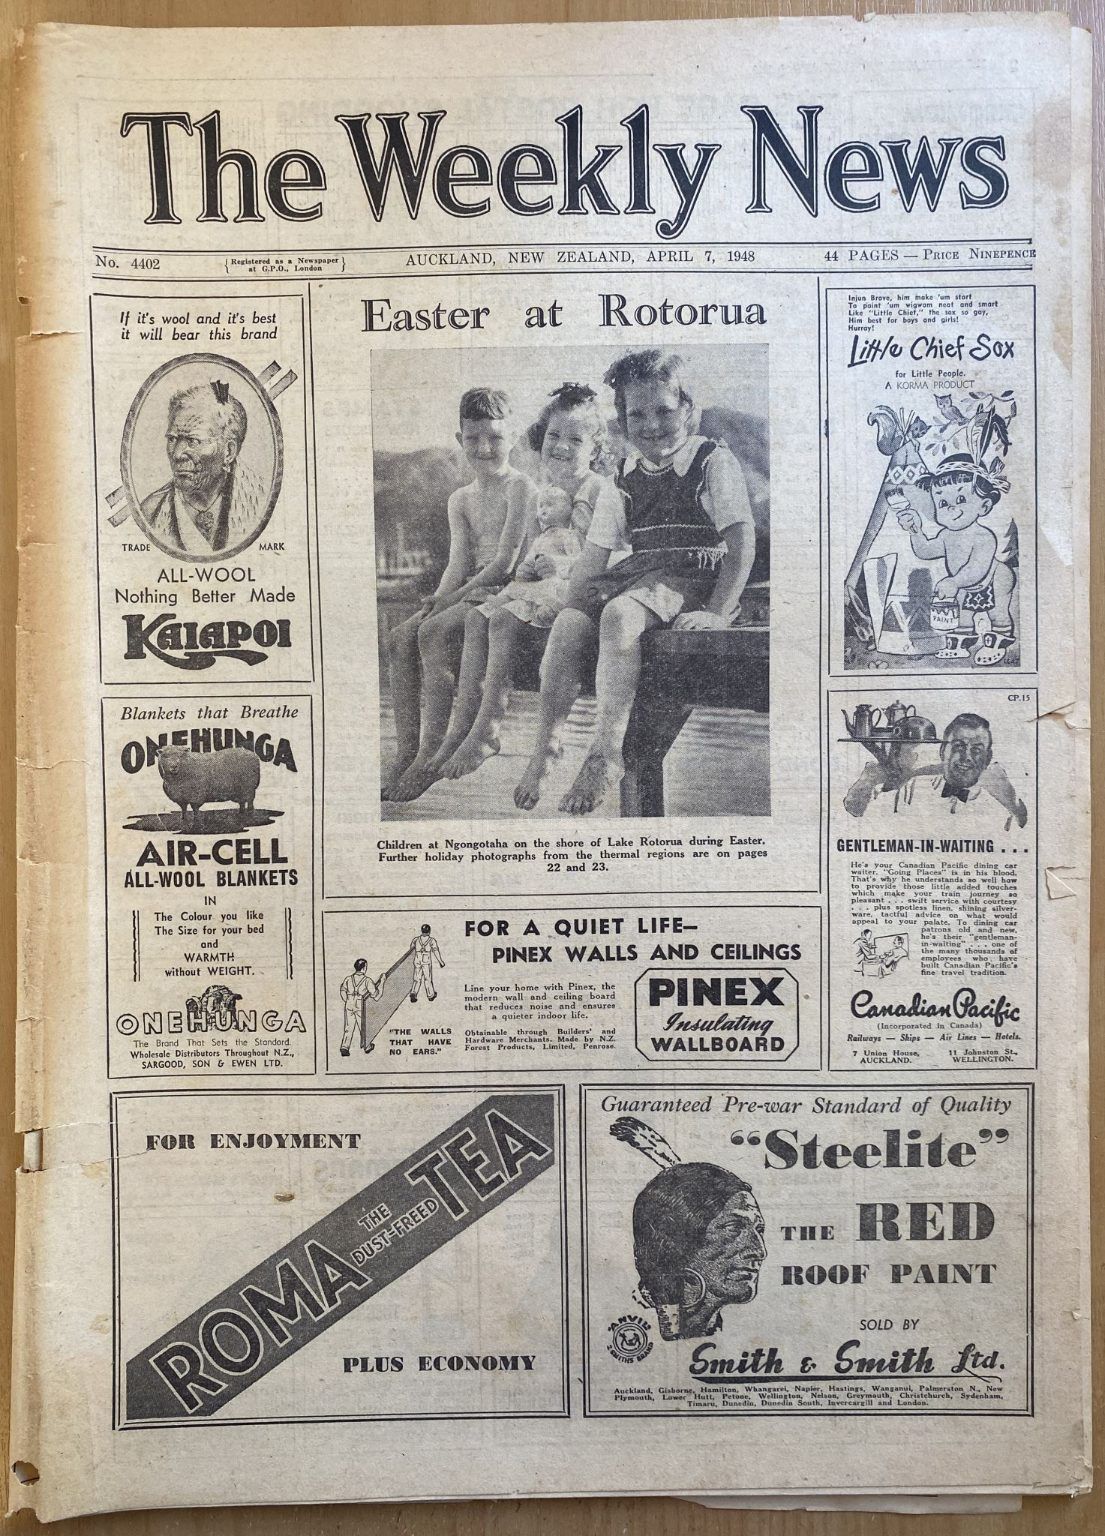 OLD NEWSPAPER: The Weekly News - No. 4402, 7 April 1948